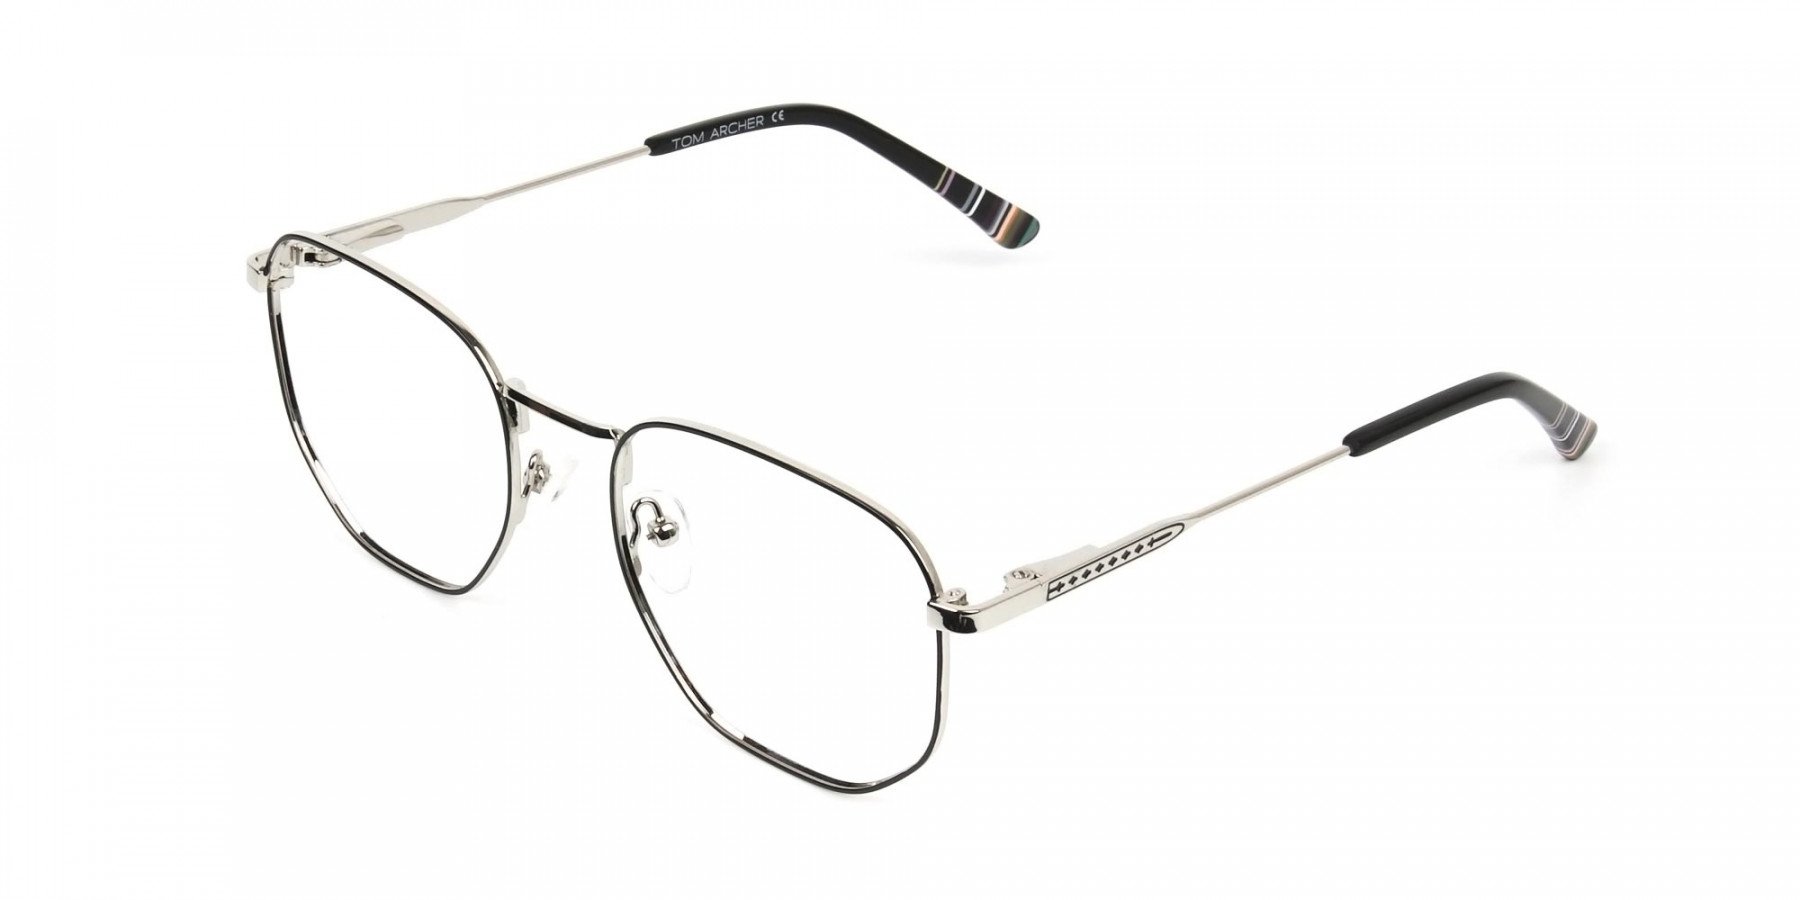 Geometric Black & Silver Spectacles - 1